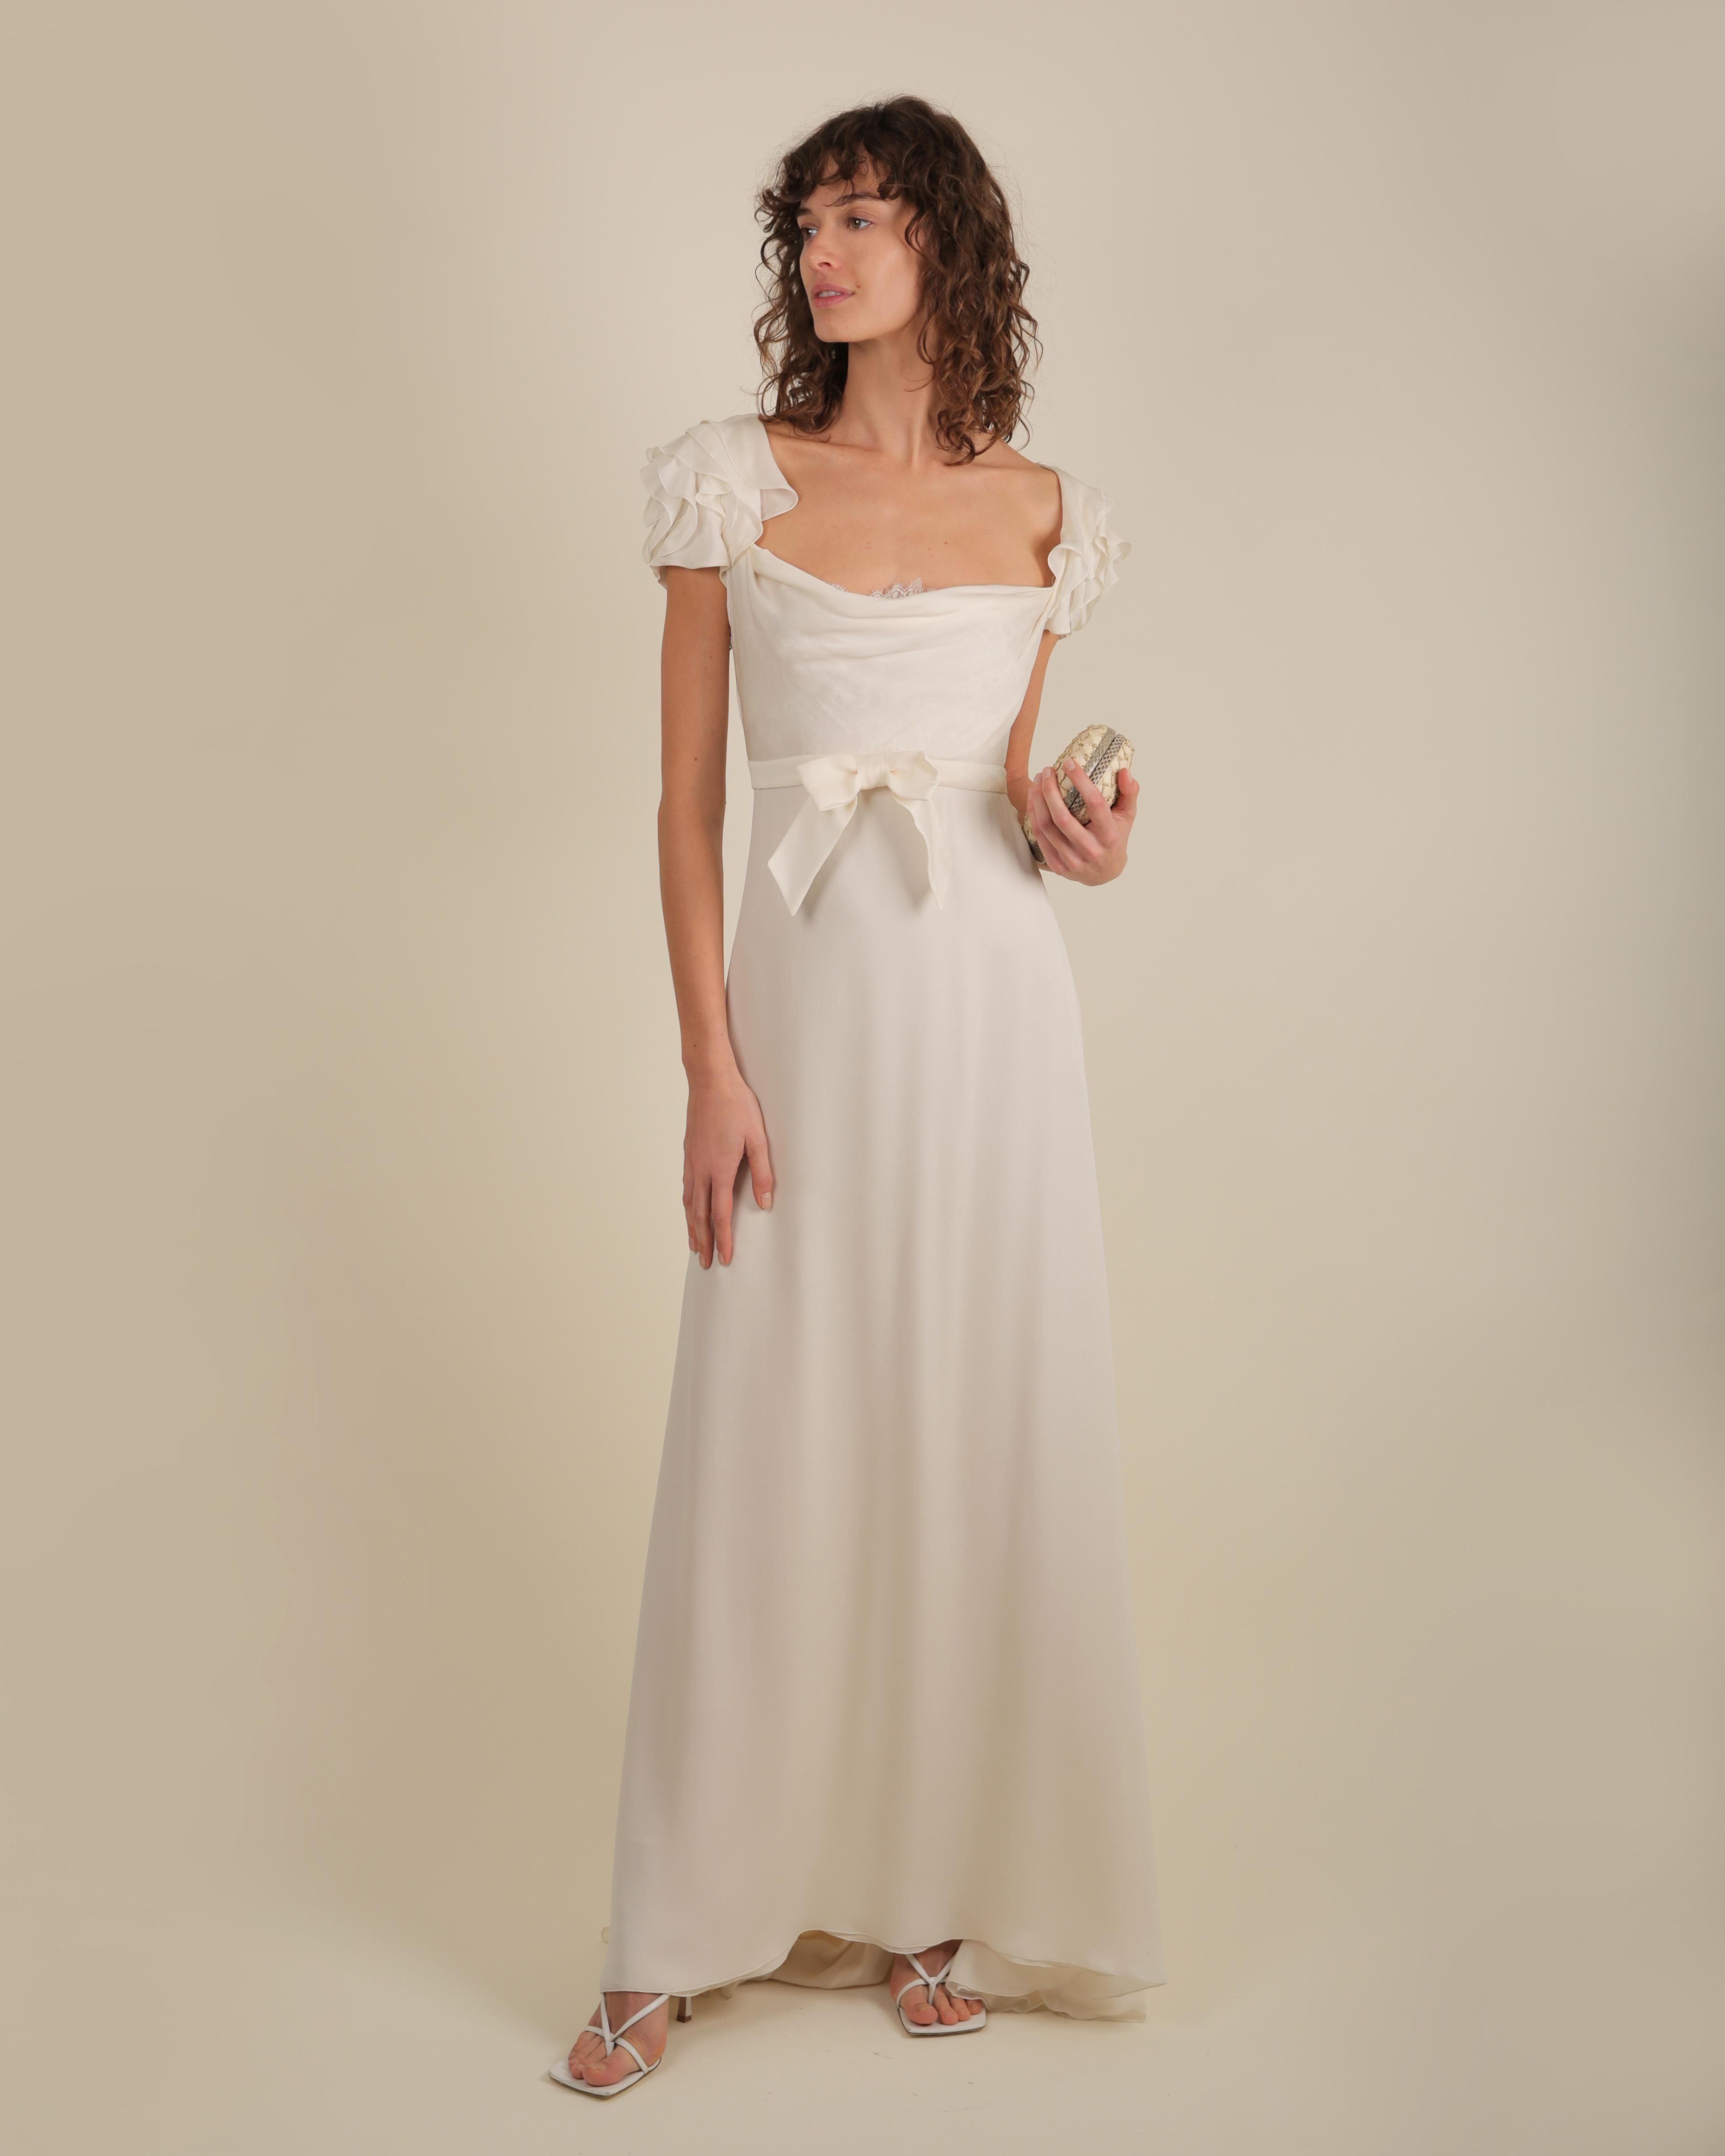 LOVE LALI Vintage

This is a beautiful ivory gown by Valentino that could be worn in an evening or just as easily as a wedding dress
The bust has an inner panel of white peekaboo lace - the neckline is slightly draped so that it slightly